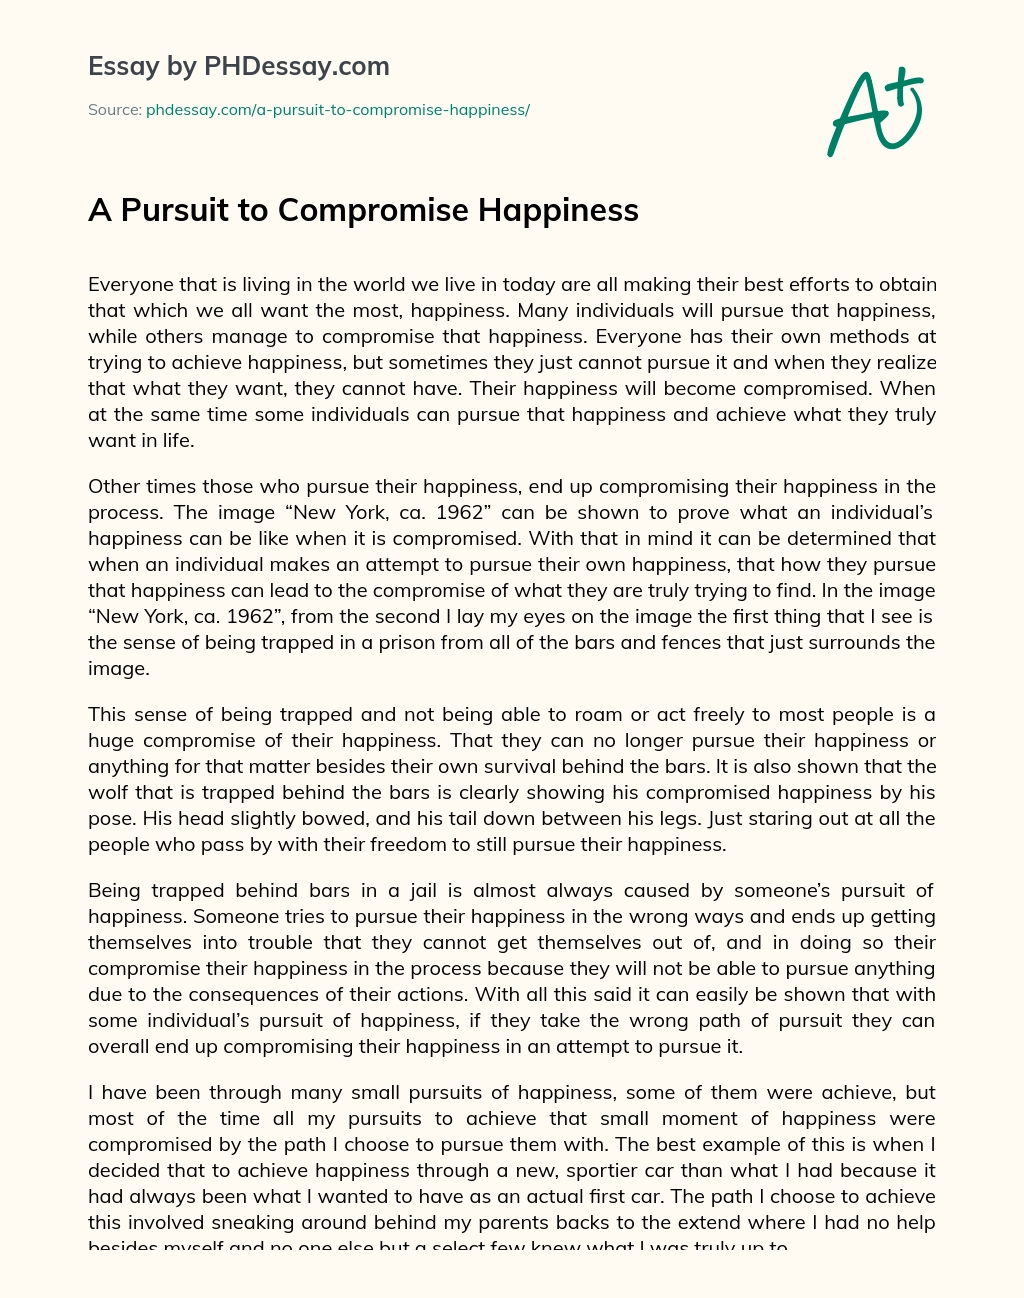 A Pursuit to Compromise Happiness essay